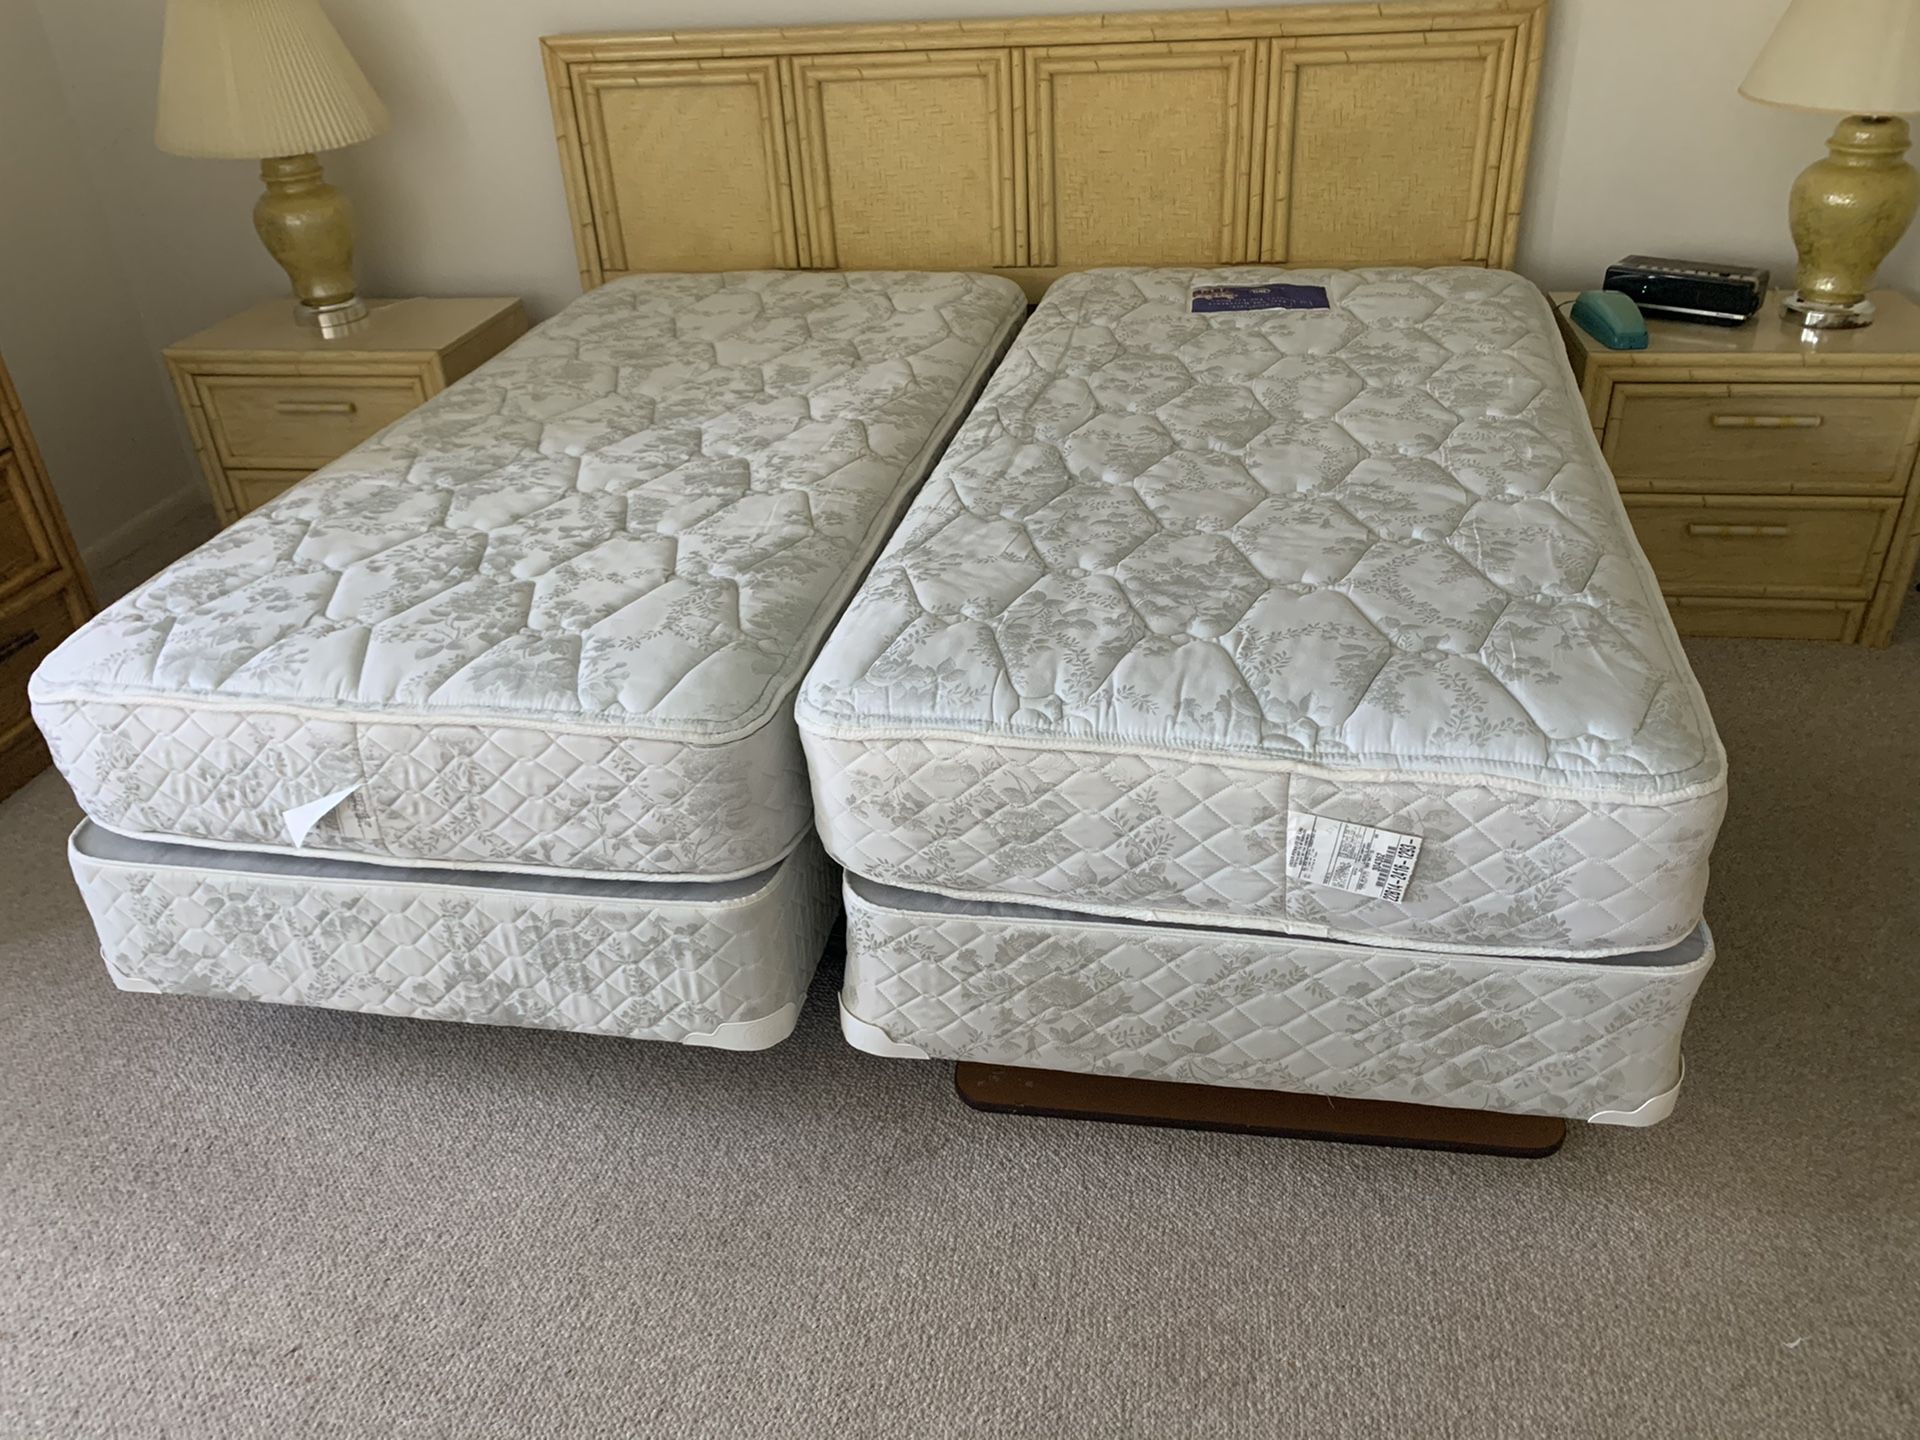 Two twin mattresses with box springs and bed frames. Both in excellent condition.